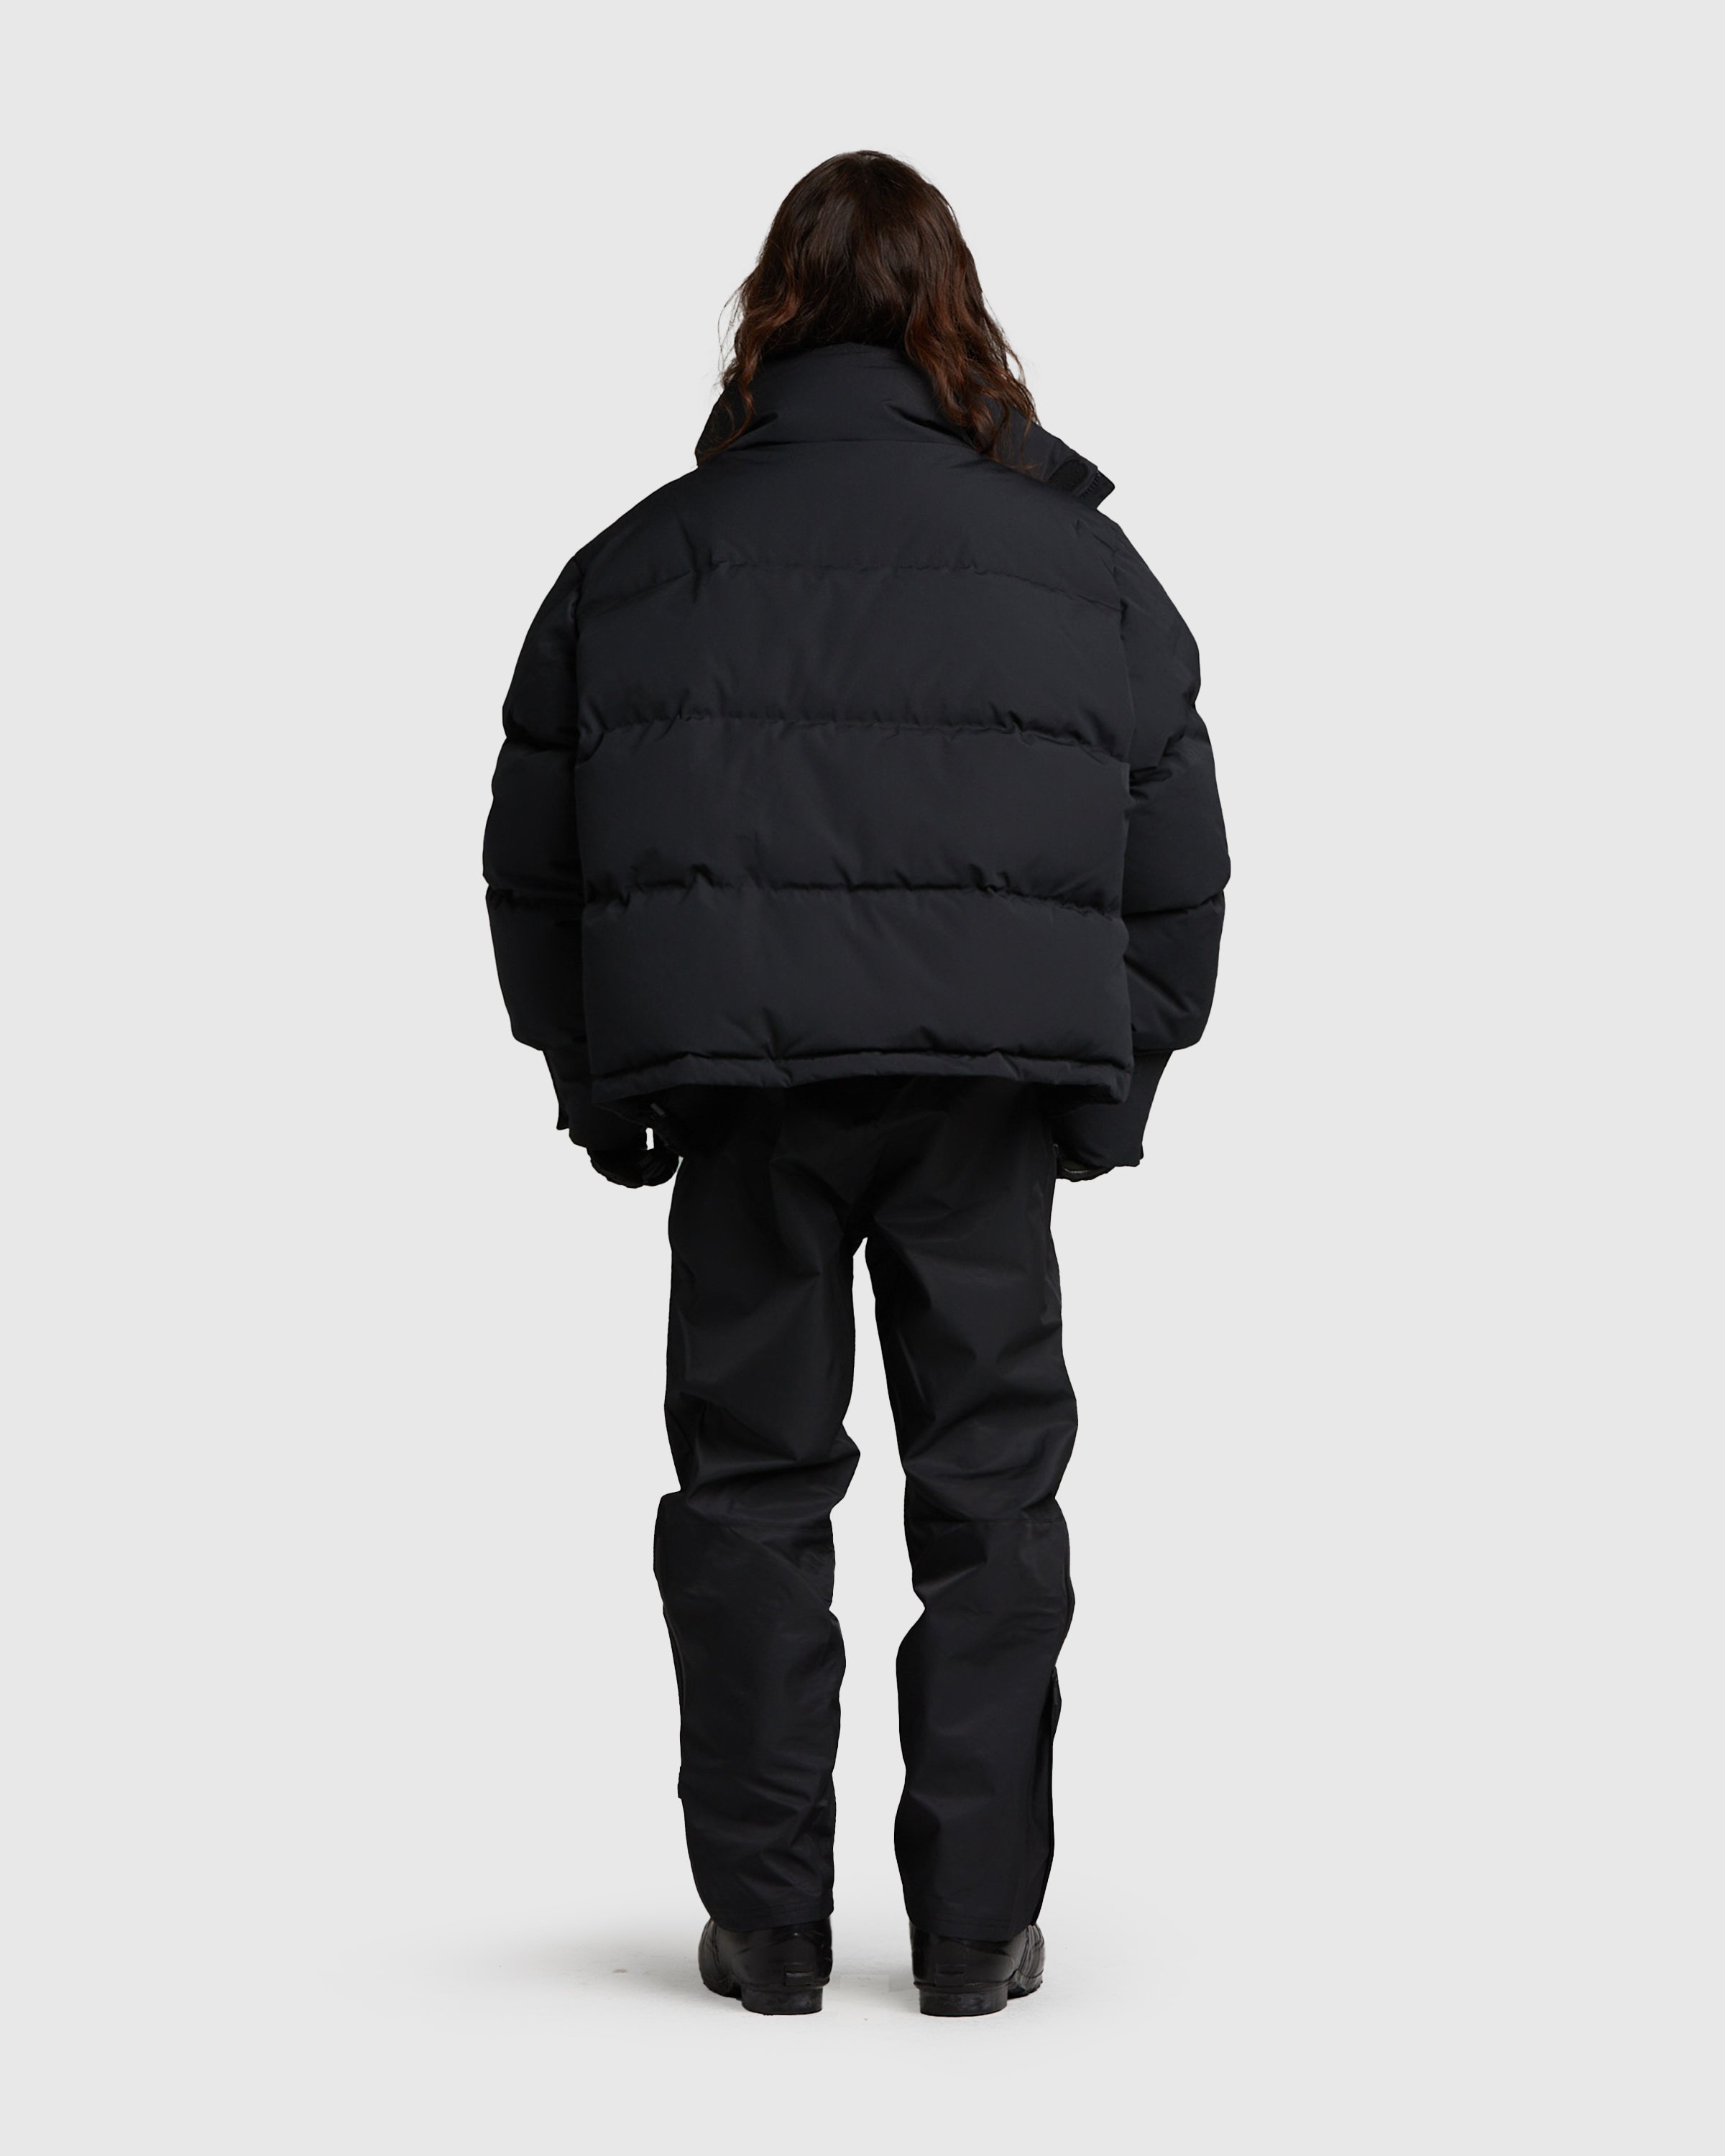 Entire Studios - PFD V2 Puffer Soot - Clothing - Black - Image 5